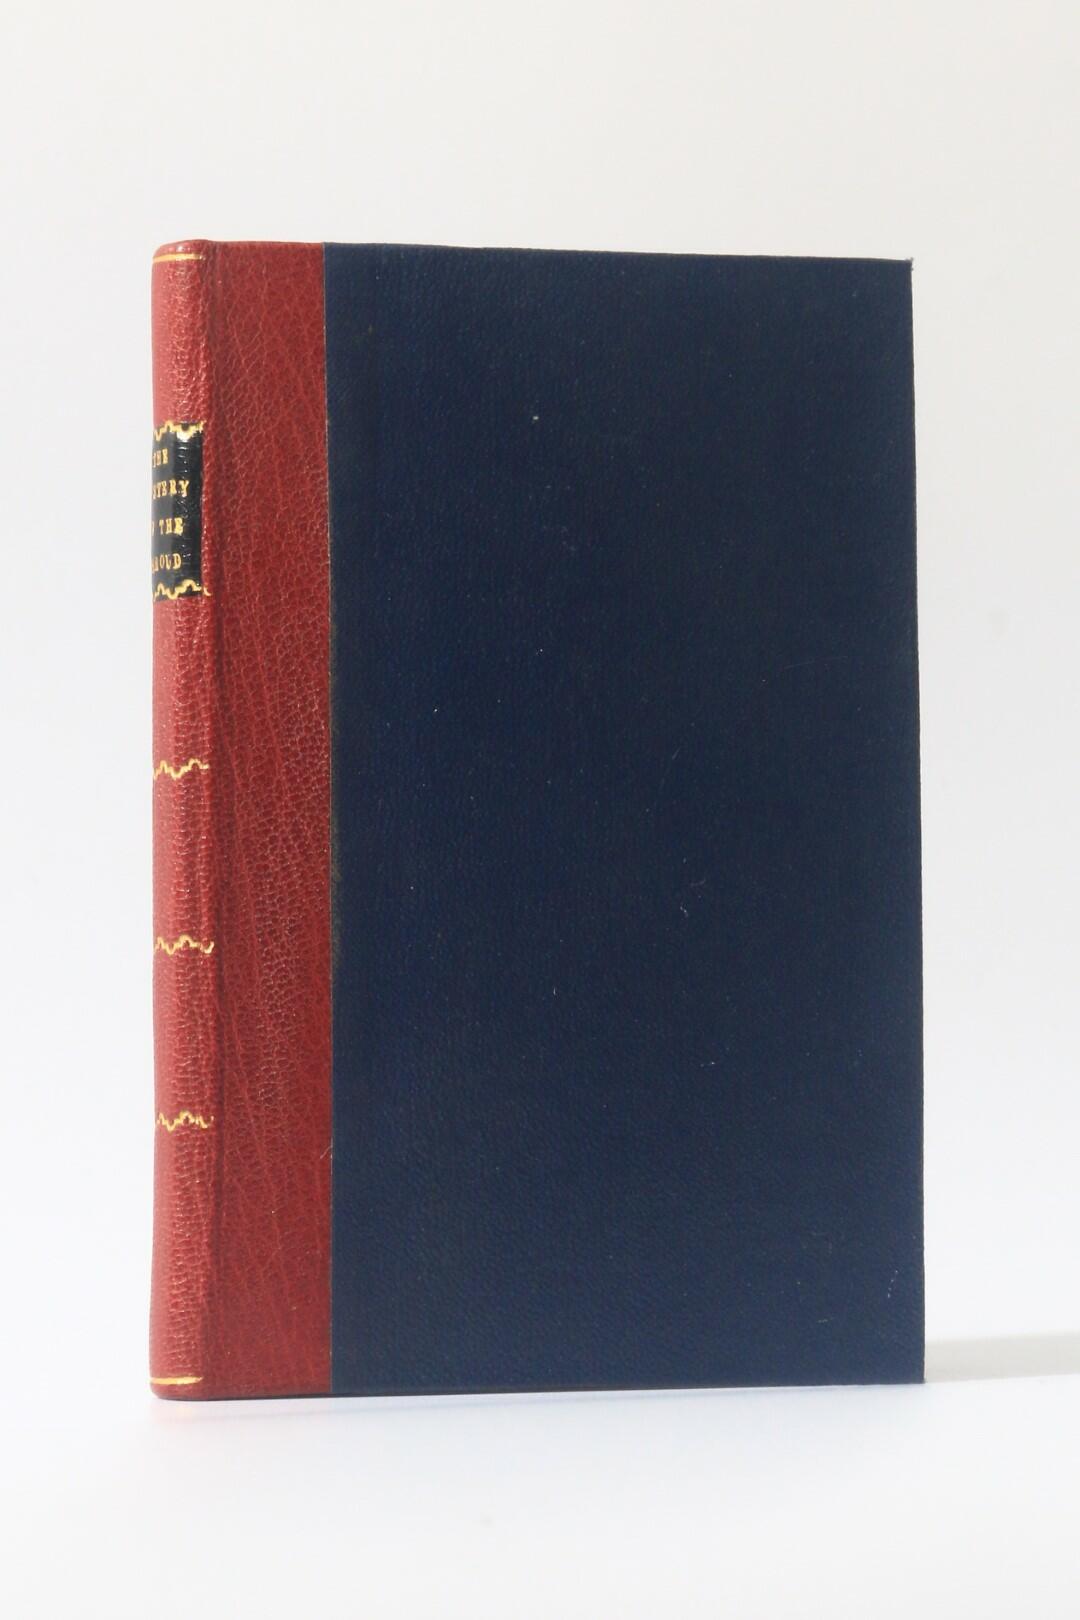 J. Drew Gay [Edgar Luderne Welch] - The Mystery of the Shroud: A Tale of Socialism - J.W. Arrowsmith & Simpkin, Marshall and Co., nd [1887], First Edition.